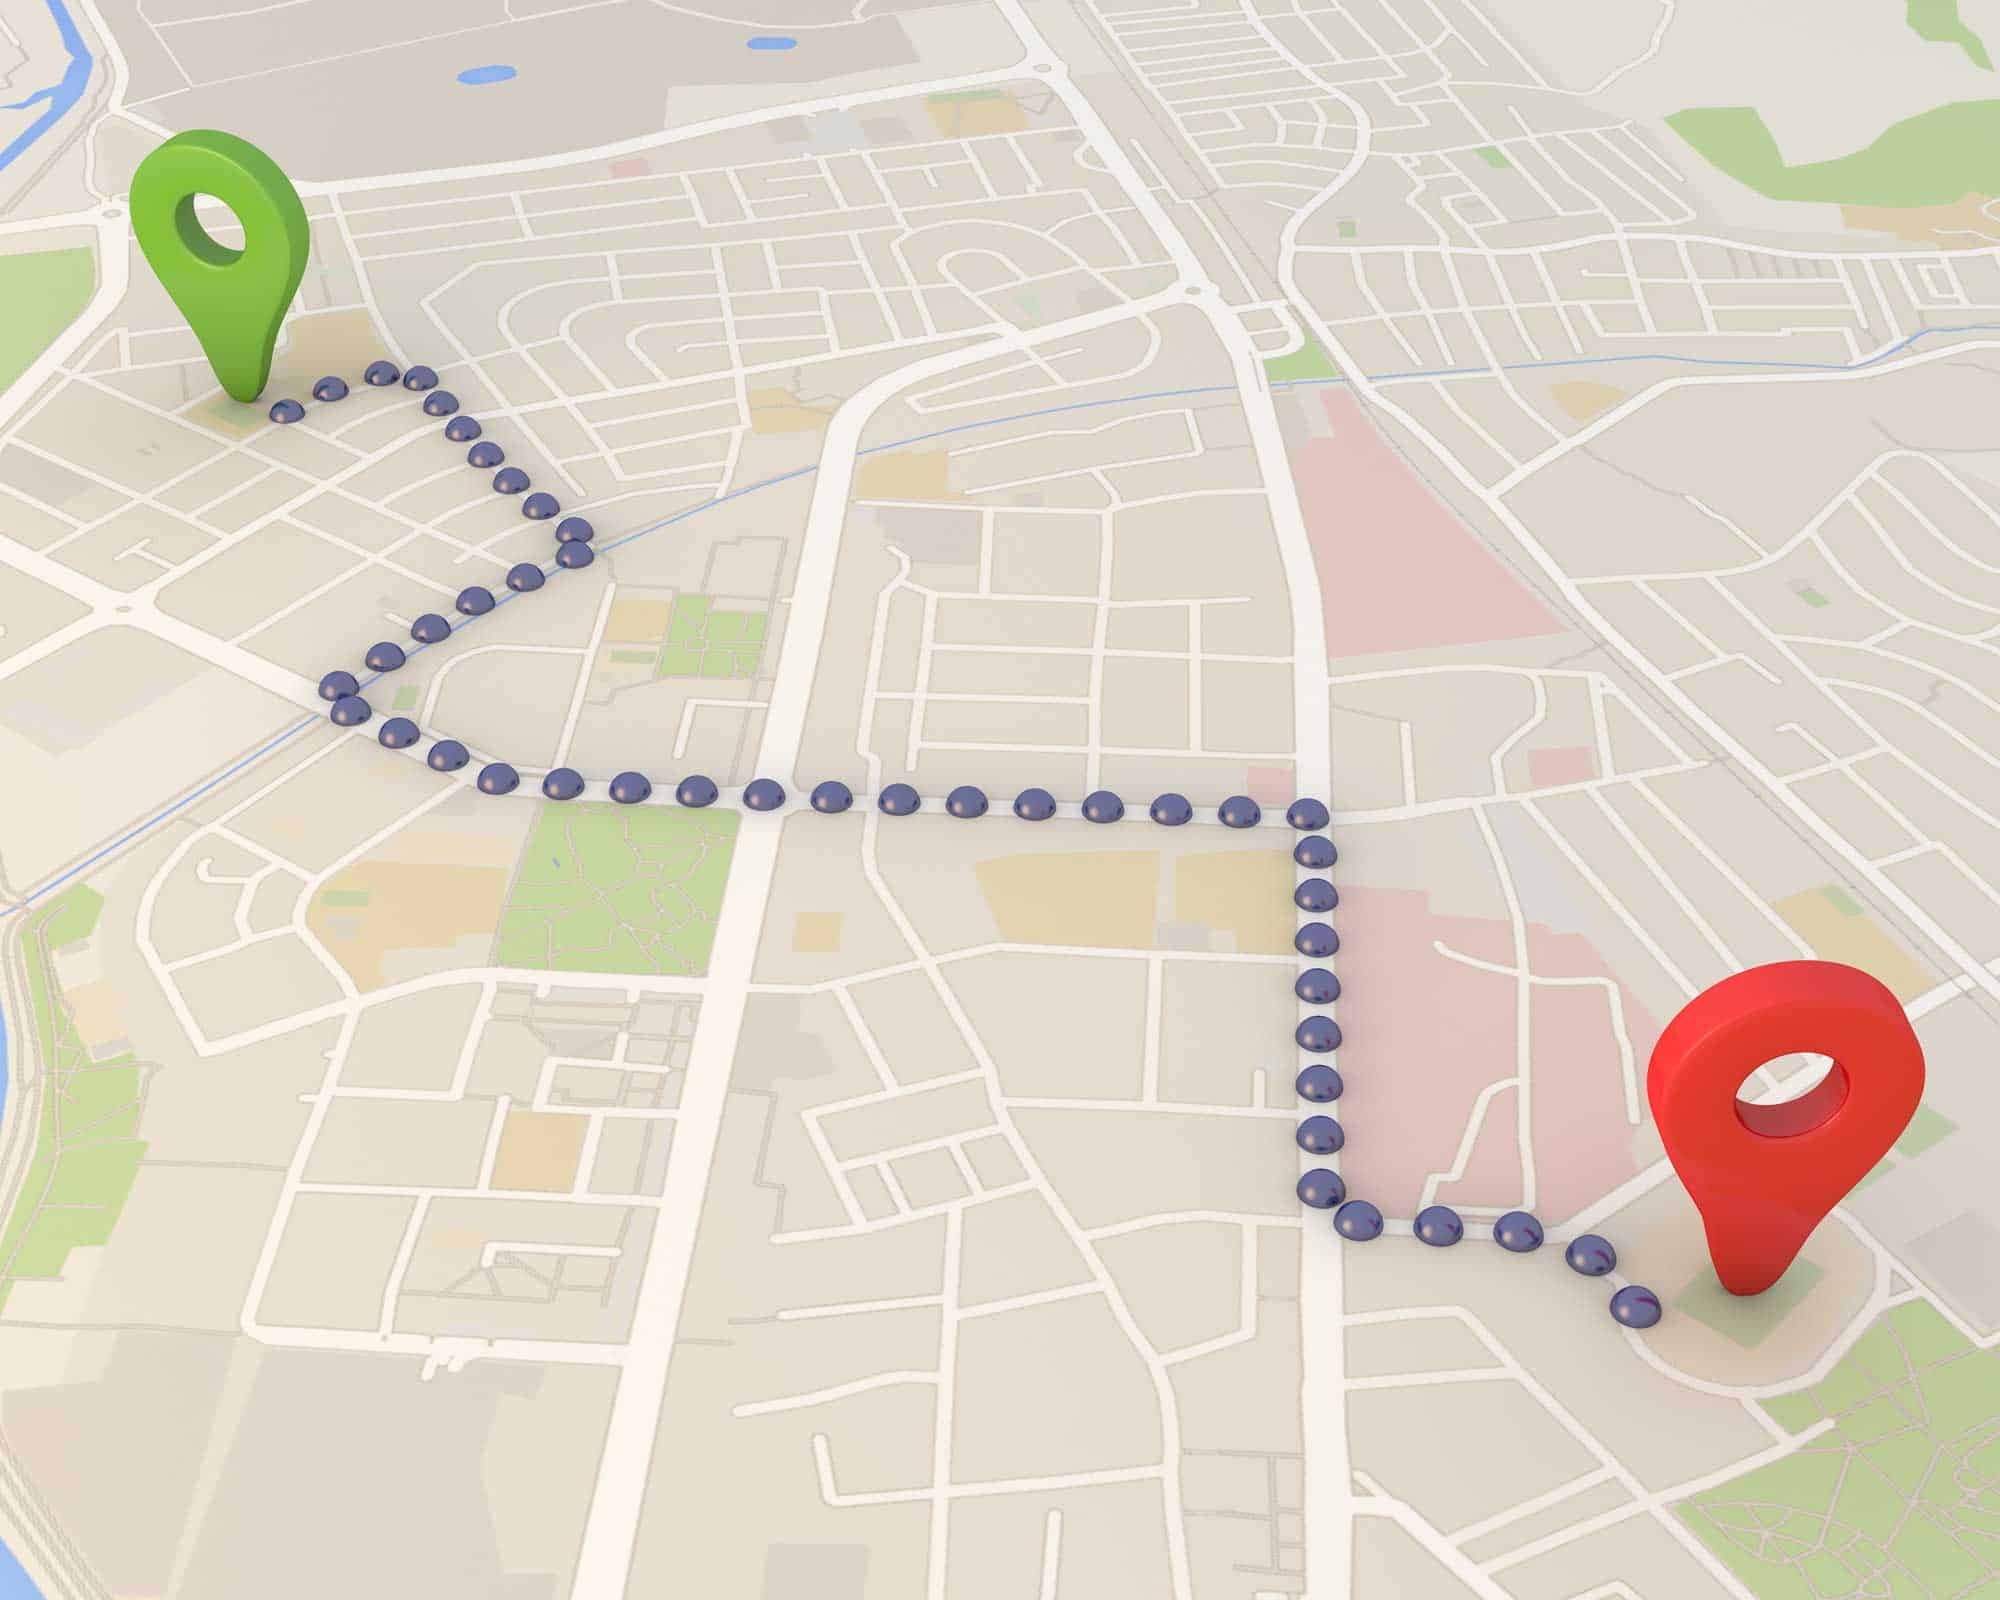  Efficient Route On Map | Route Optimization API | OnTerra Systems USA<br />
